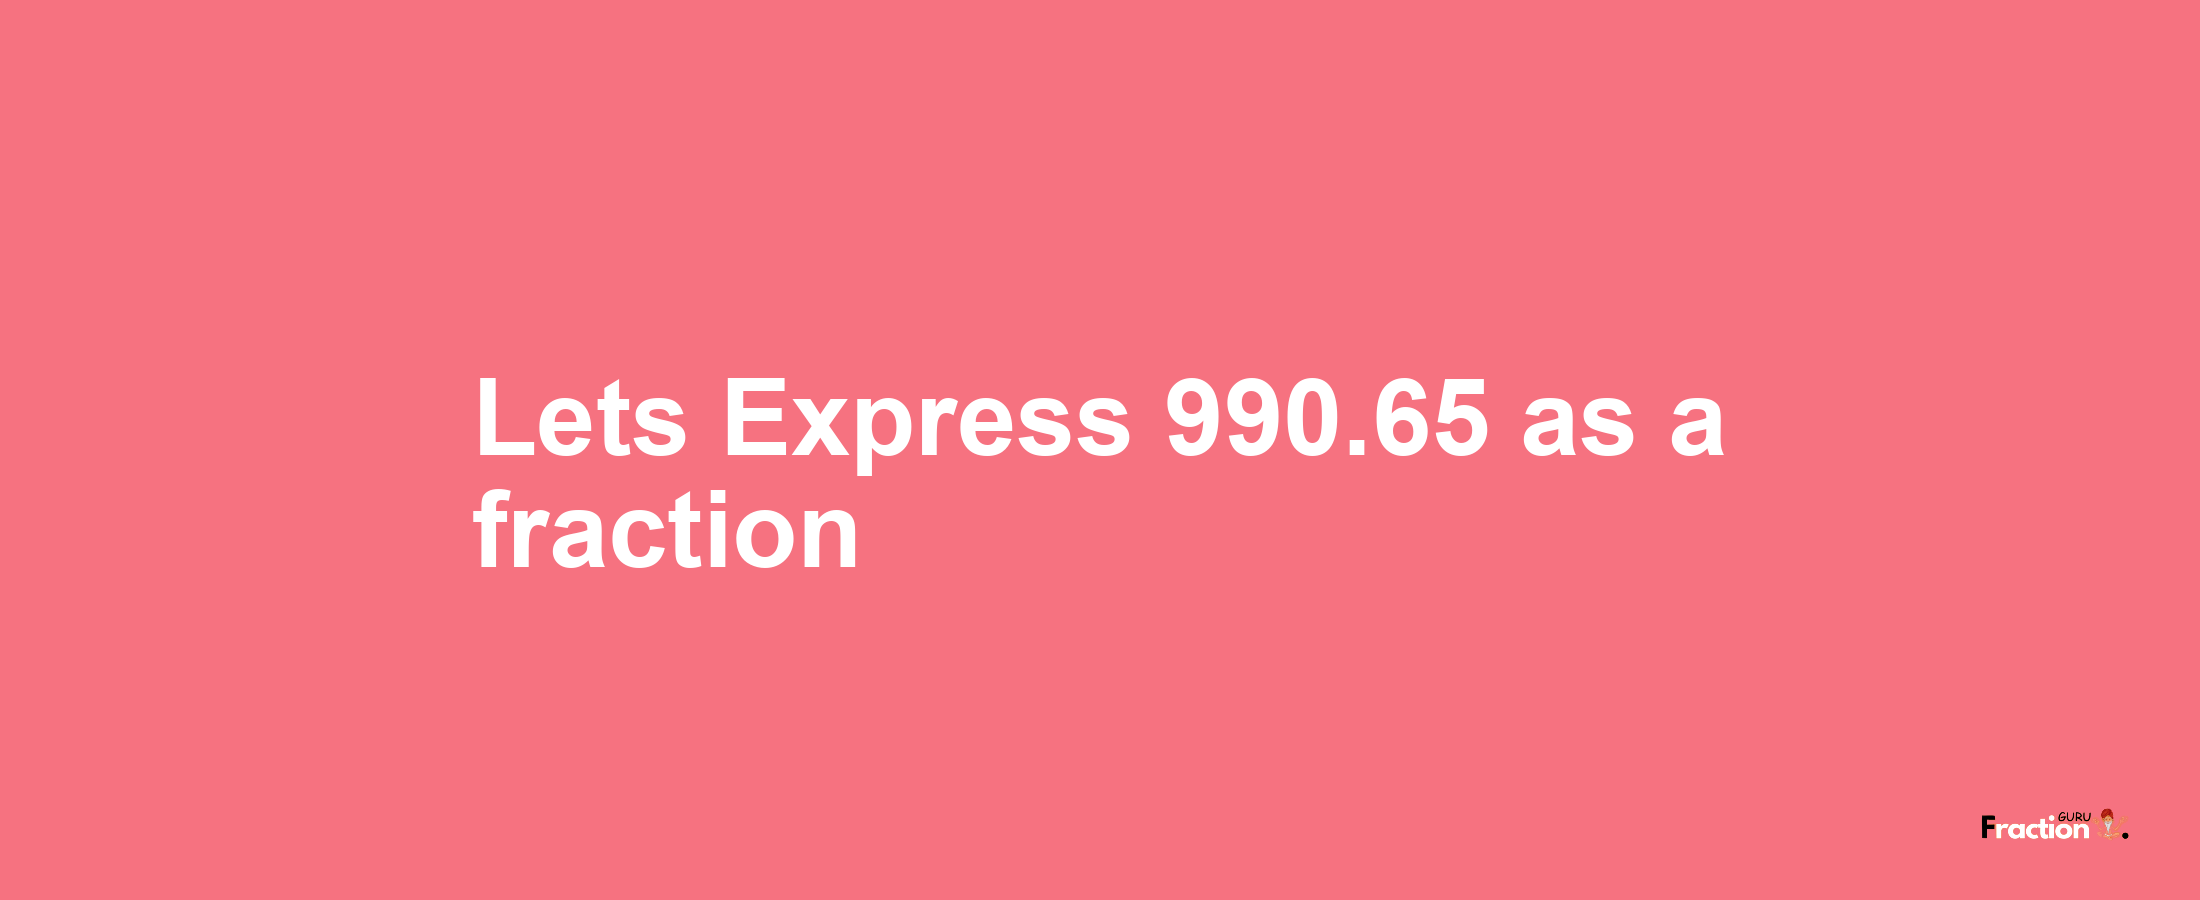 Lets Express 990.65 as afraction